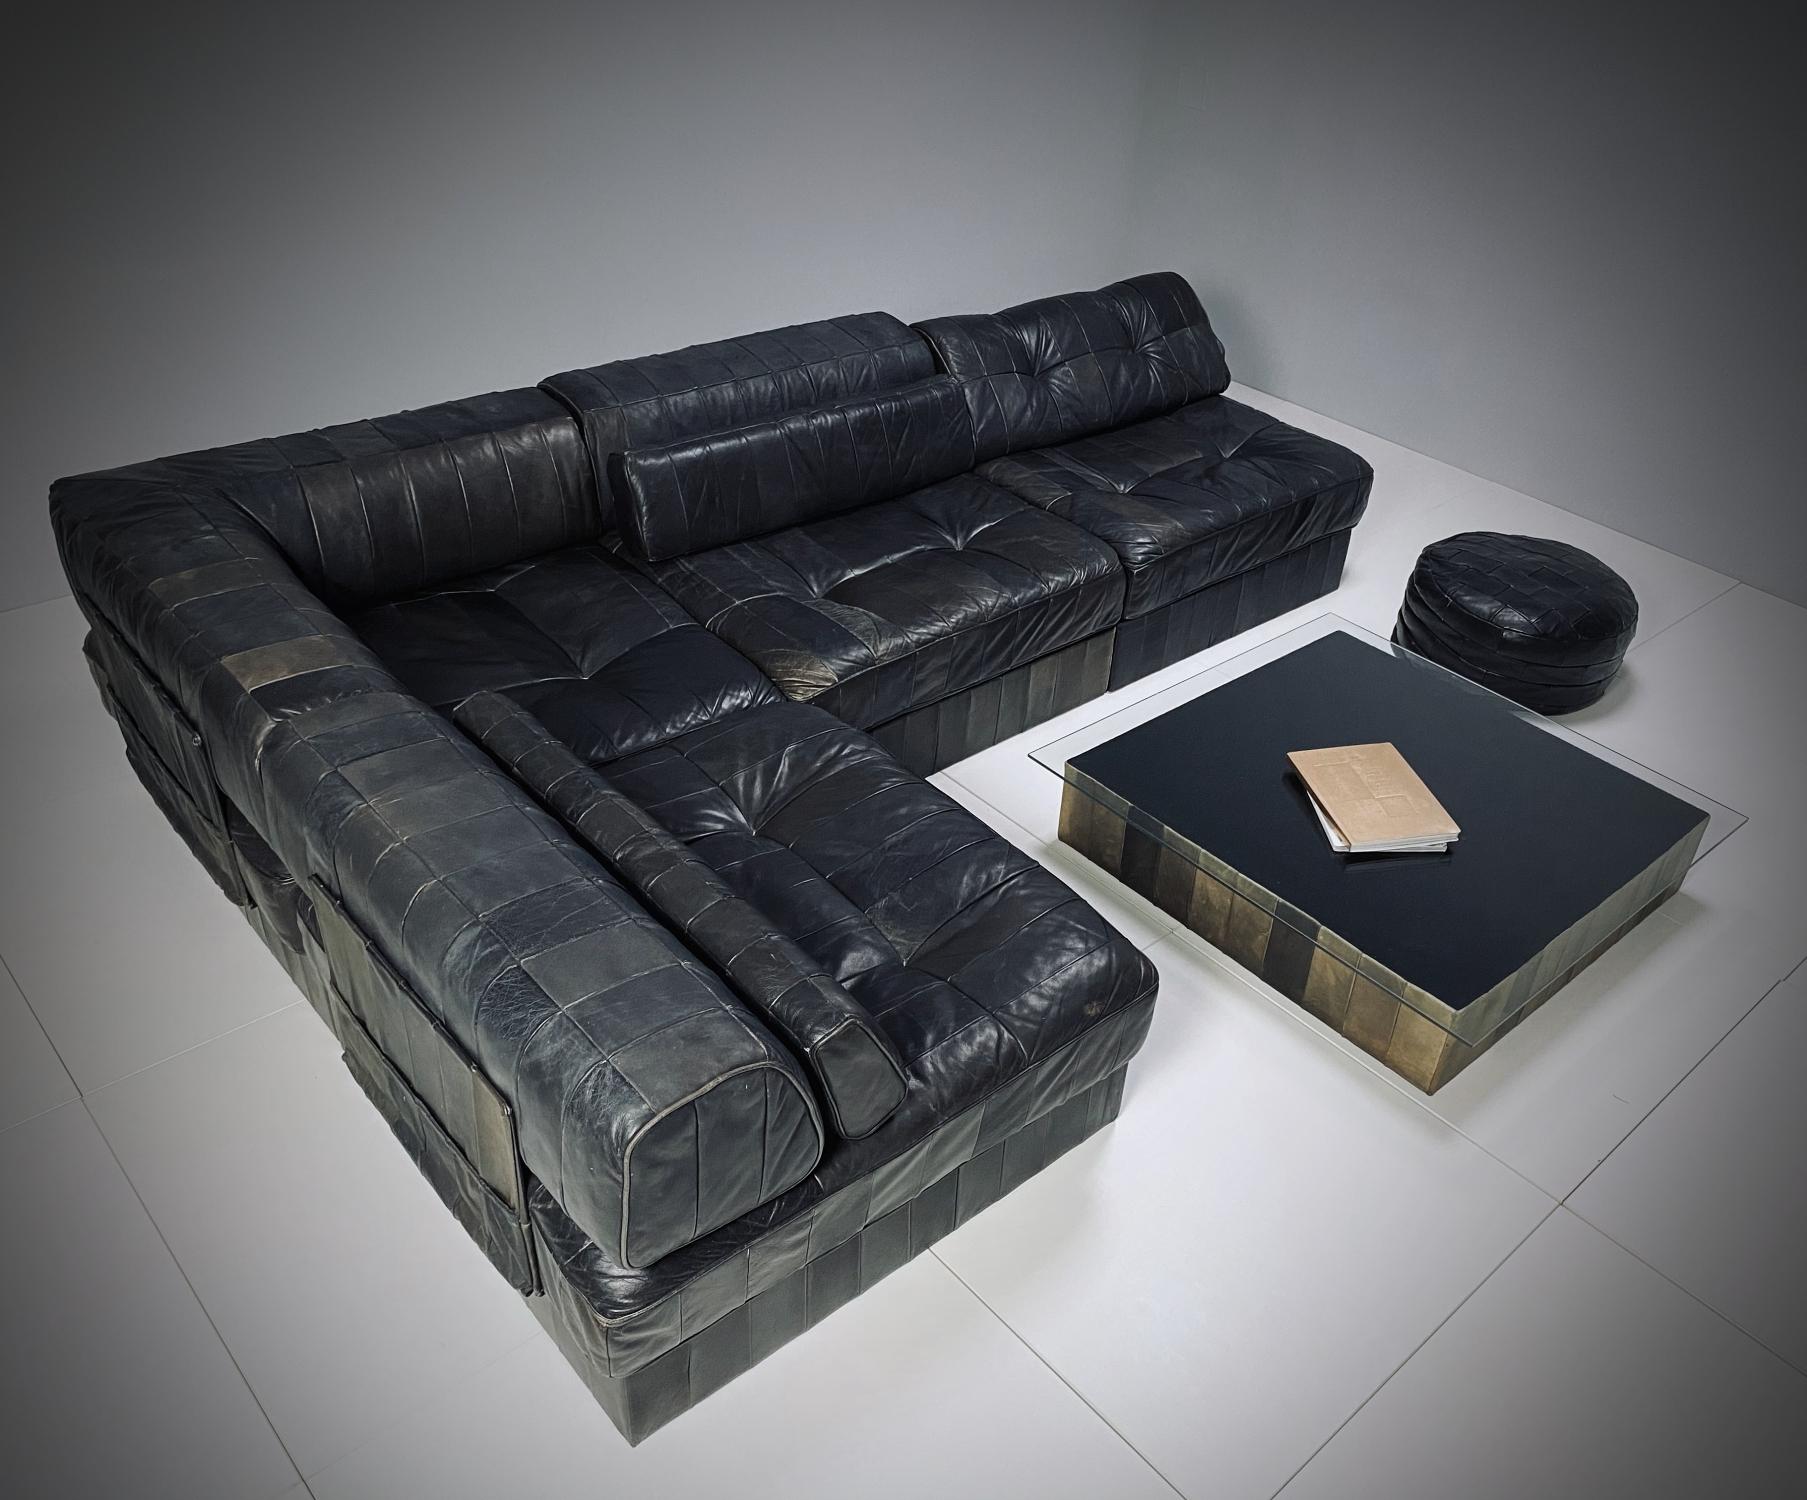 DeSede DS 88 modular sofa with coffee table and pouf in dark green/black patchwork leather. The set is made of high quality soft leather, typical of DeSede. The sofa consists of four sections - each with a base, cushion and a back cushion, all of